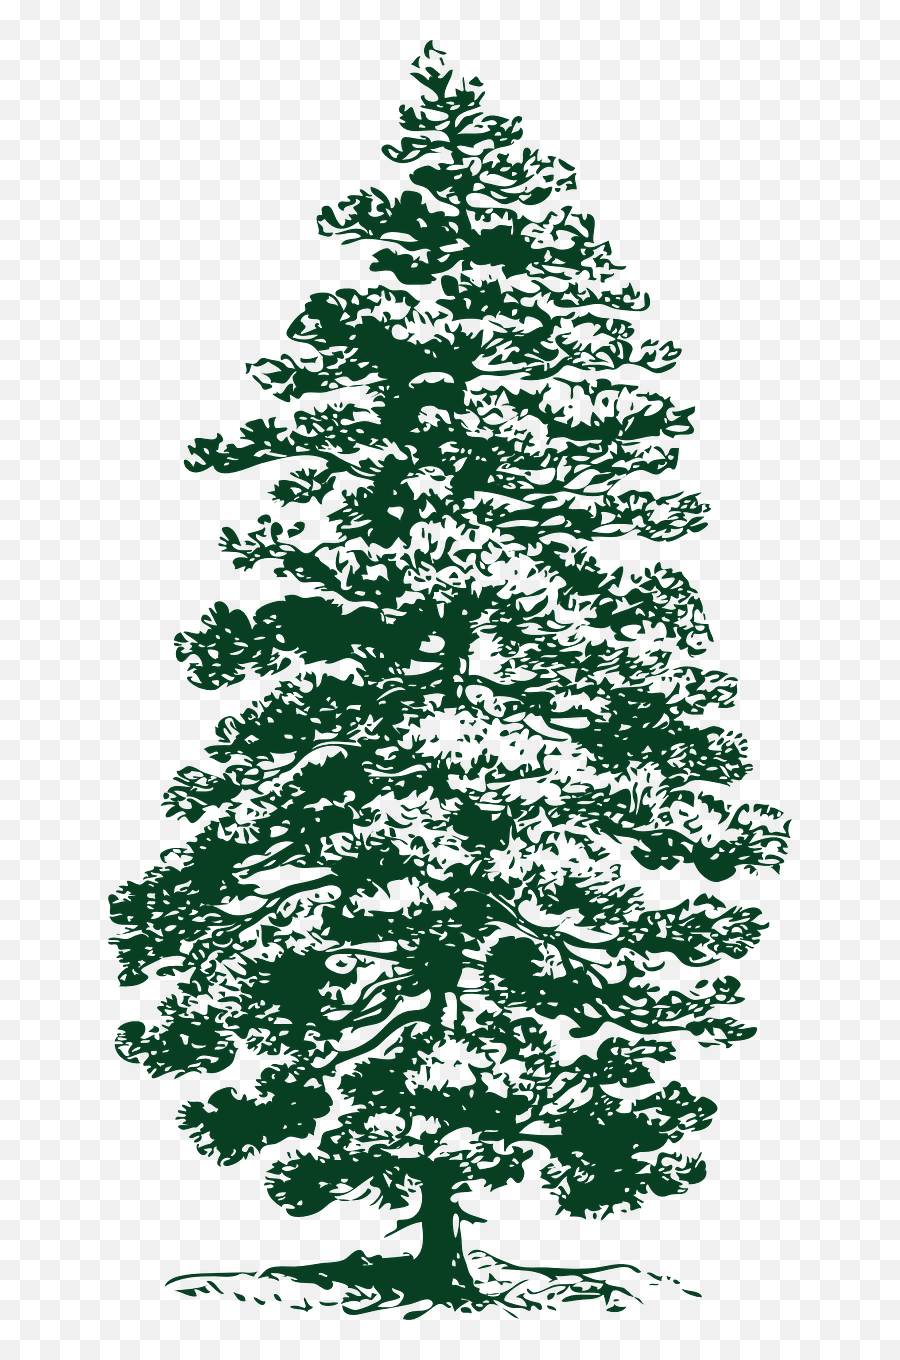 Fir Png And Vectors For Free Download - Dlpngcom Pine Tree Clip Art,Evergreen Tree Png